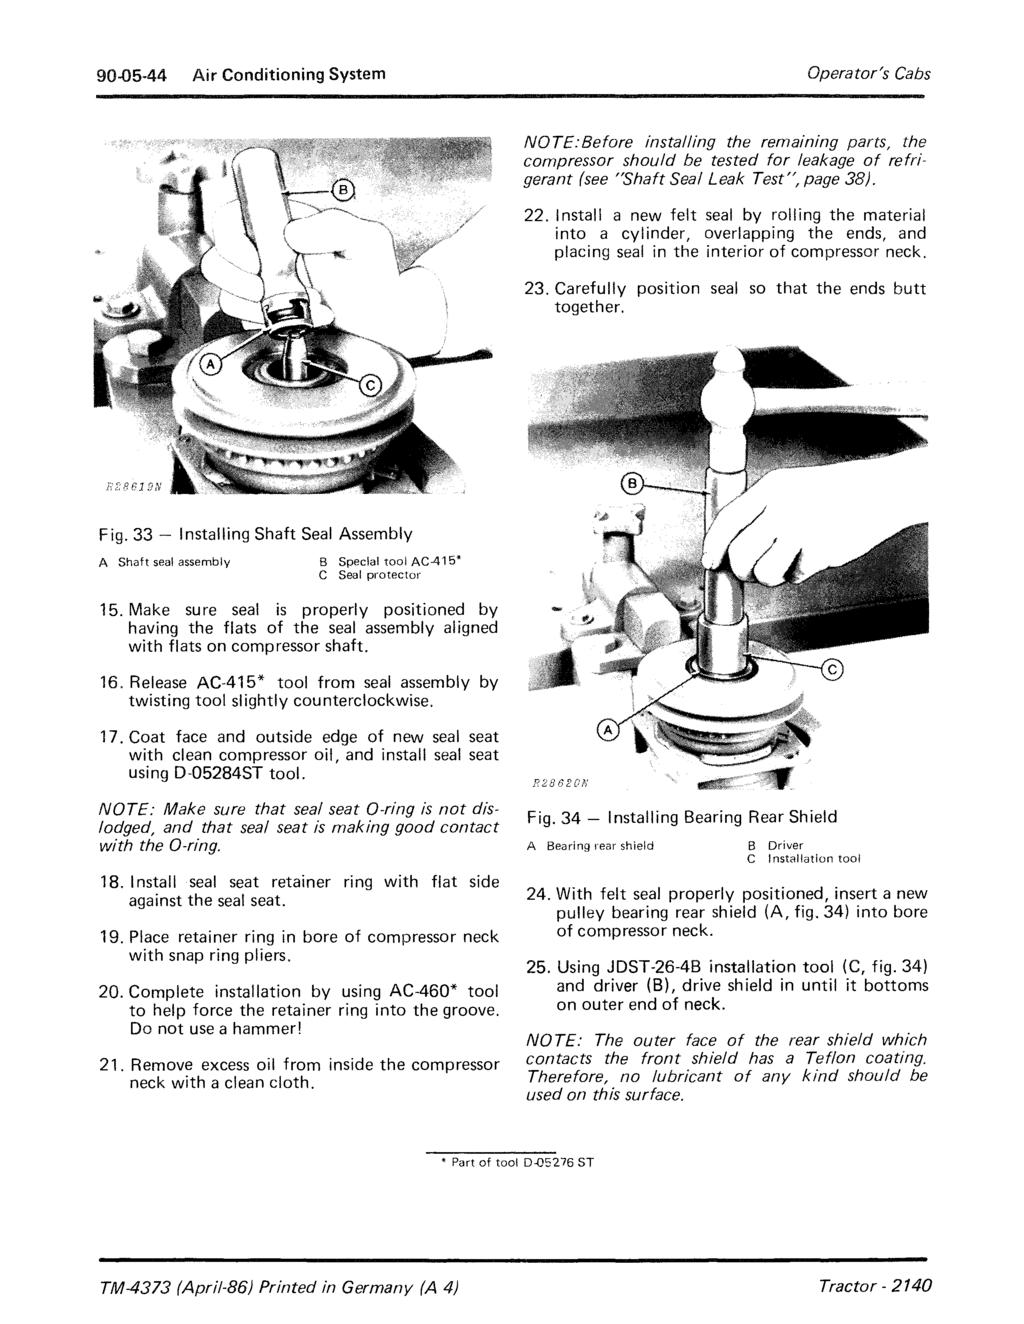 90-05-44 Air Conditioning System Operator's Cabs NOTE:Before installing the remammg parts, the compressor should be tested for leakage of refrigerant (see "Shaft Seal Leak Test", page 38). 22.